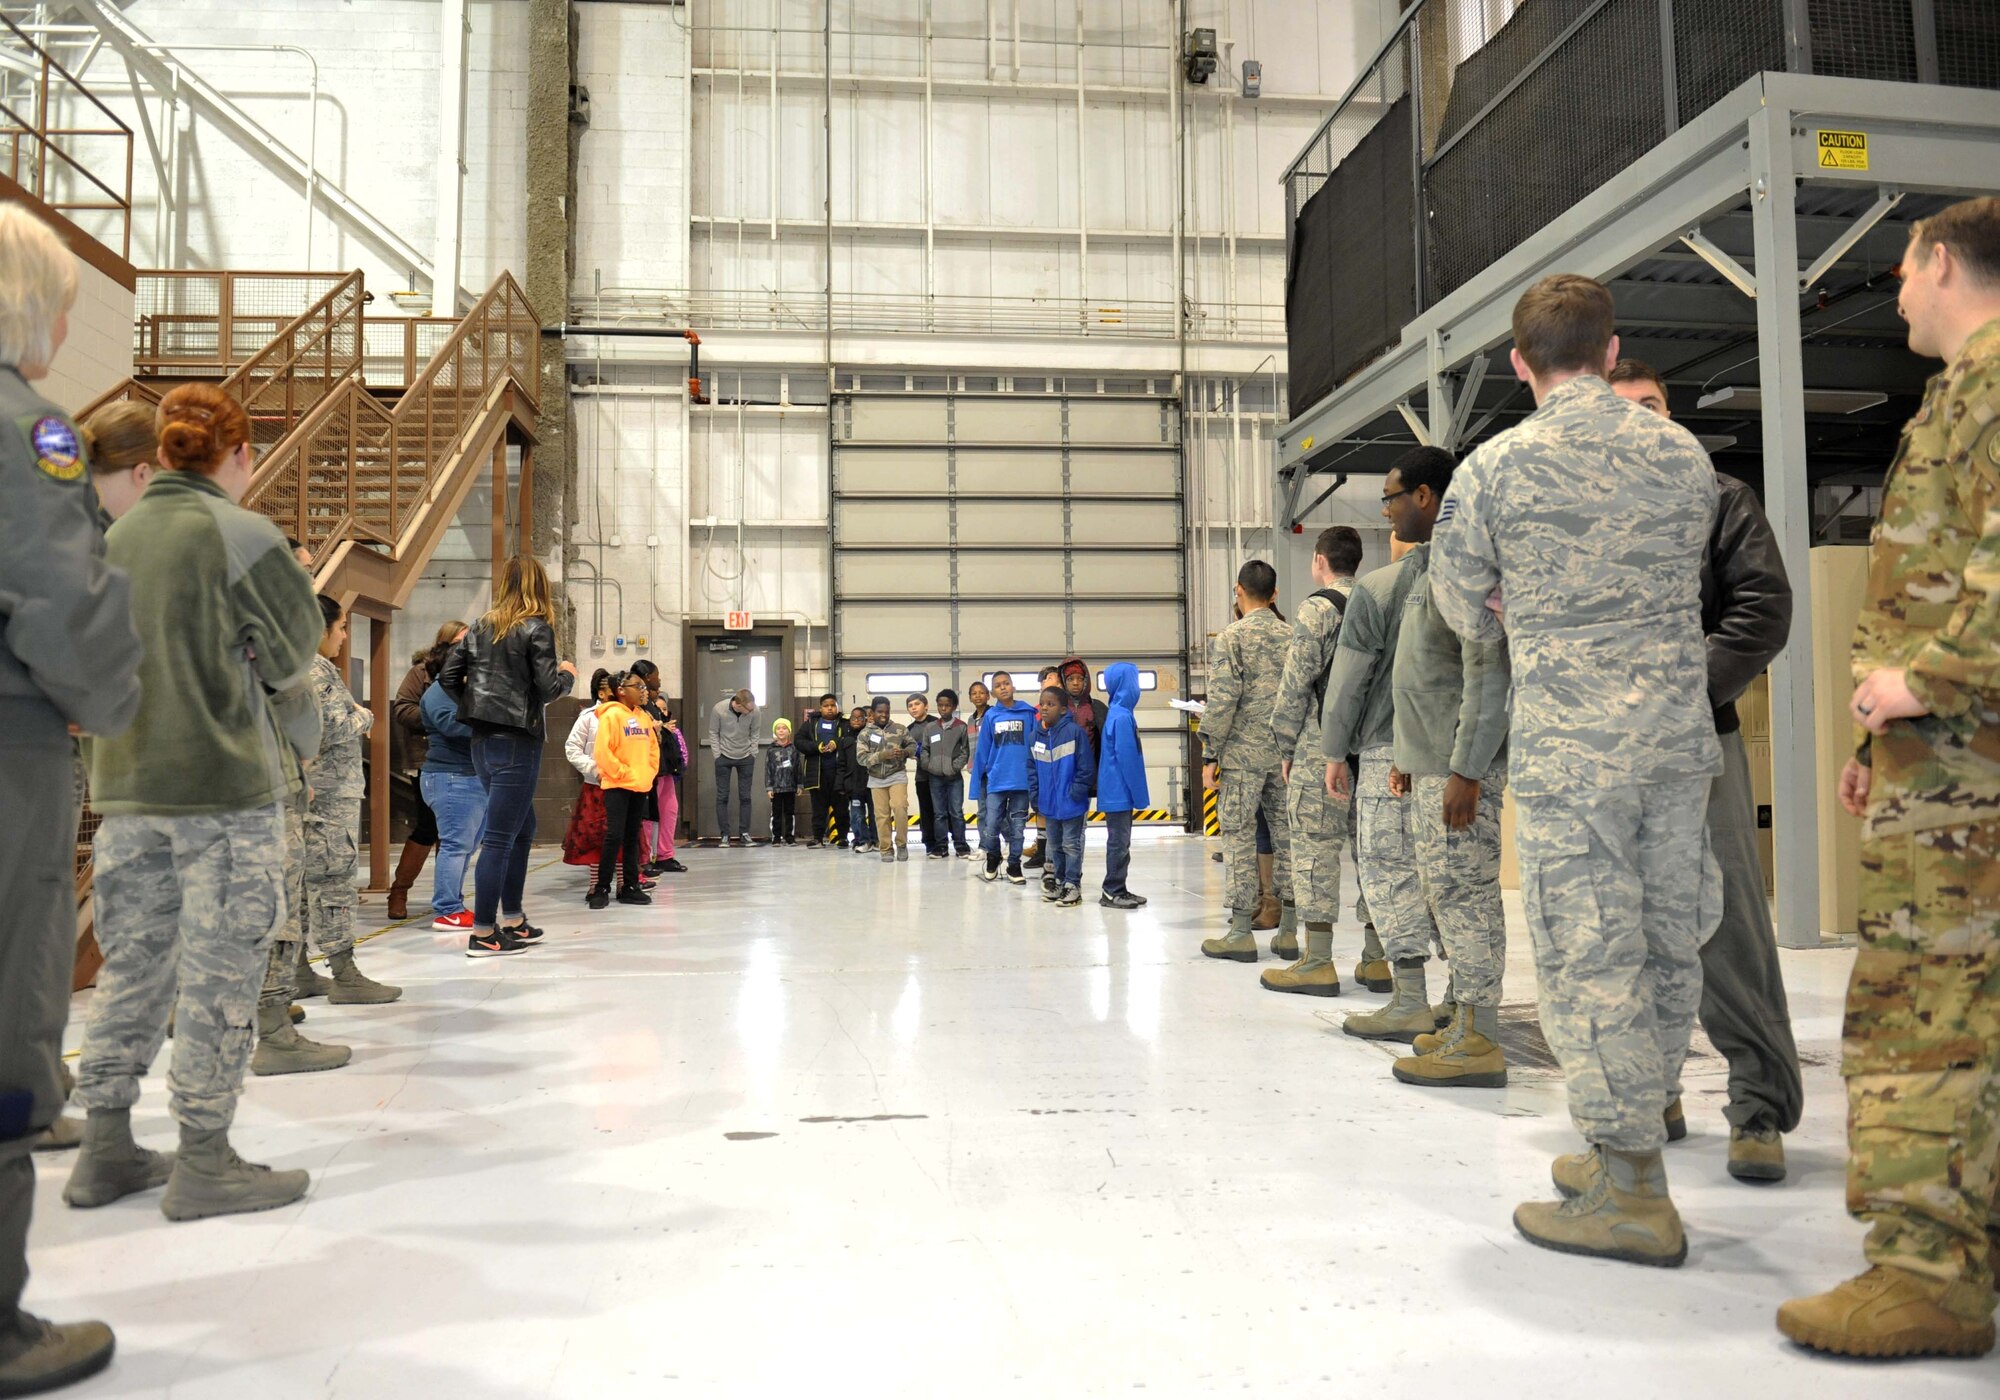 Volunteer Airmen wait to meet children from Big Brothers Big Sisters Dec. 19, 2018, at McConnell Air Force Base, Kansas. Operation Santa brought kids from BBBS to McConnell to spend some time with Airmen, build gingerbread houses and receive presents. (U.S. Air Force photo by Staff Sgt. David Bernal Del Agua)